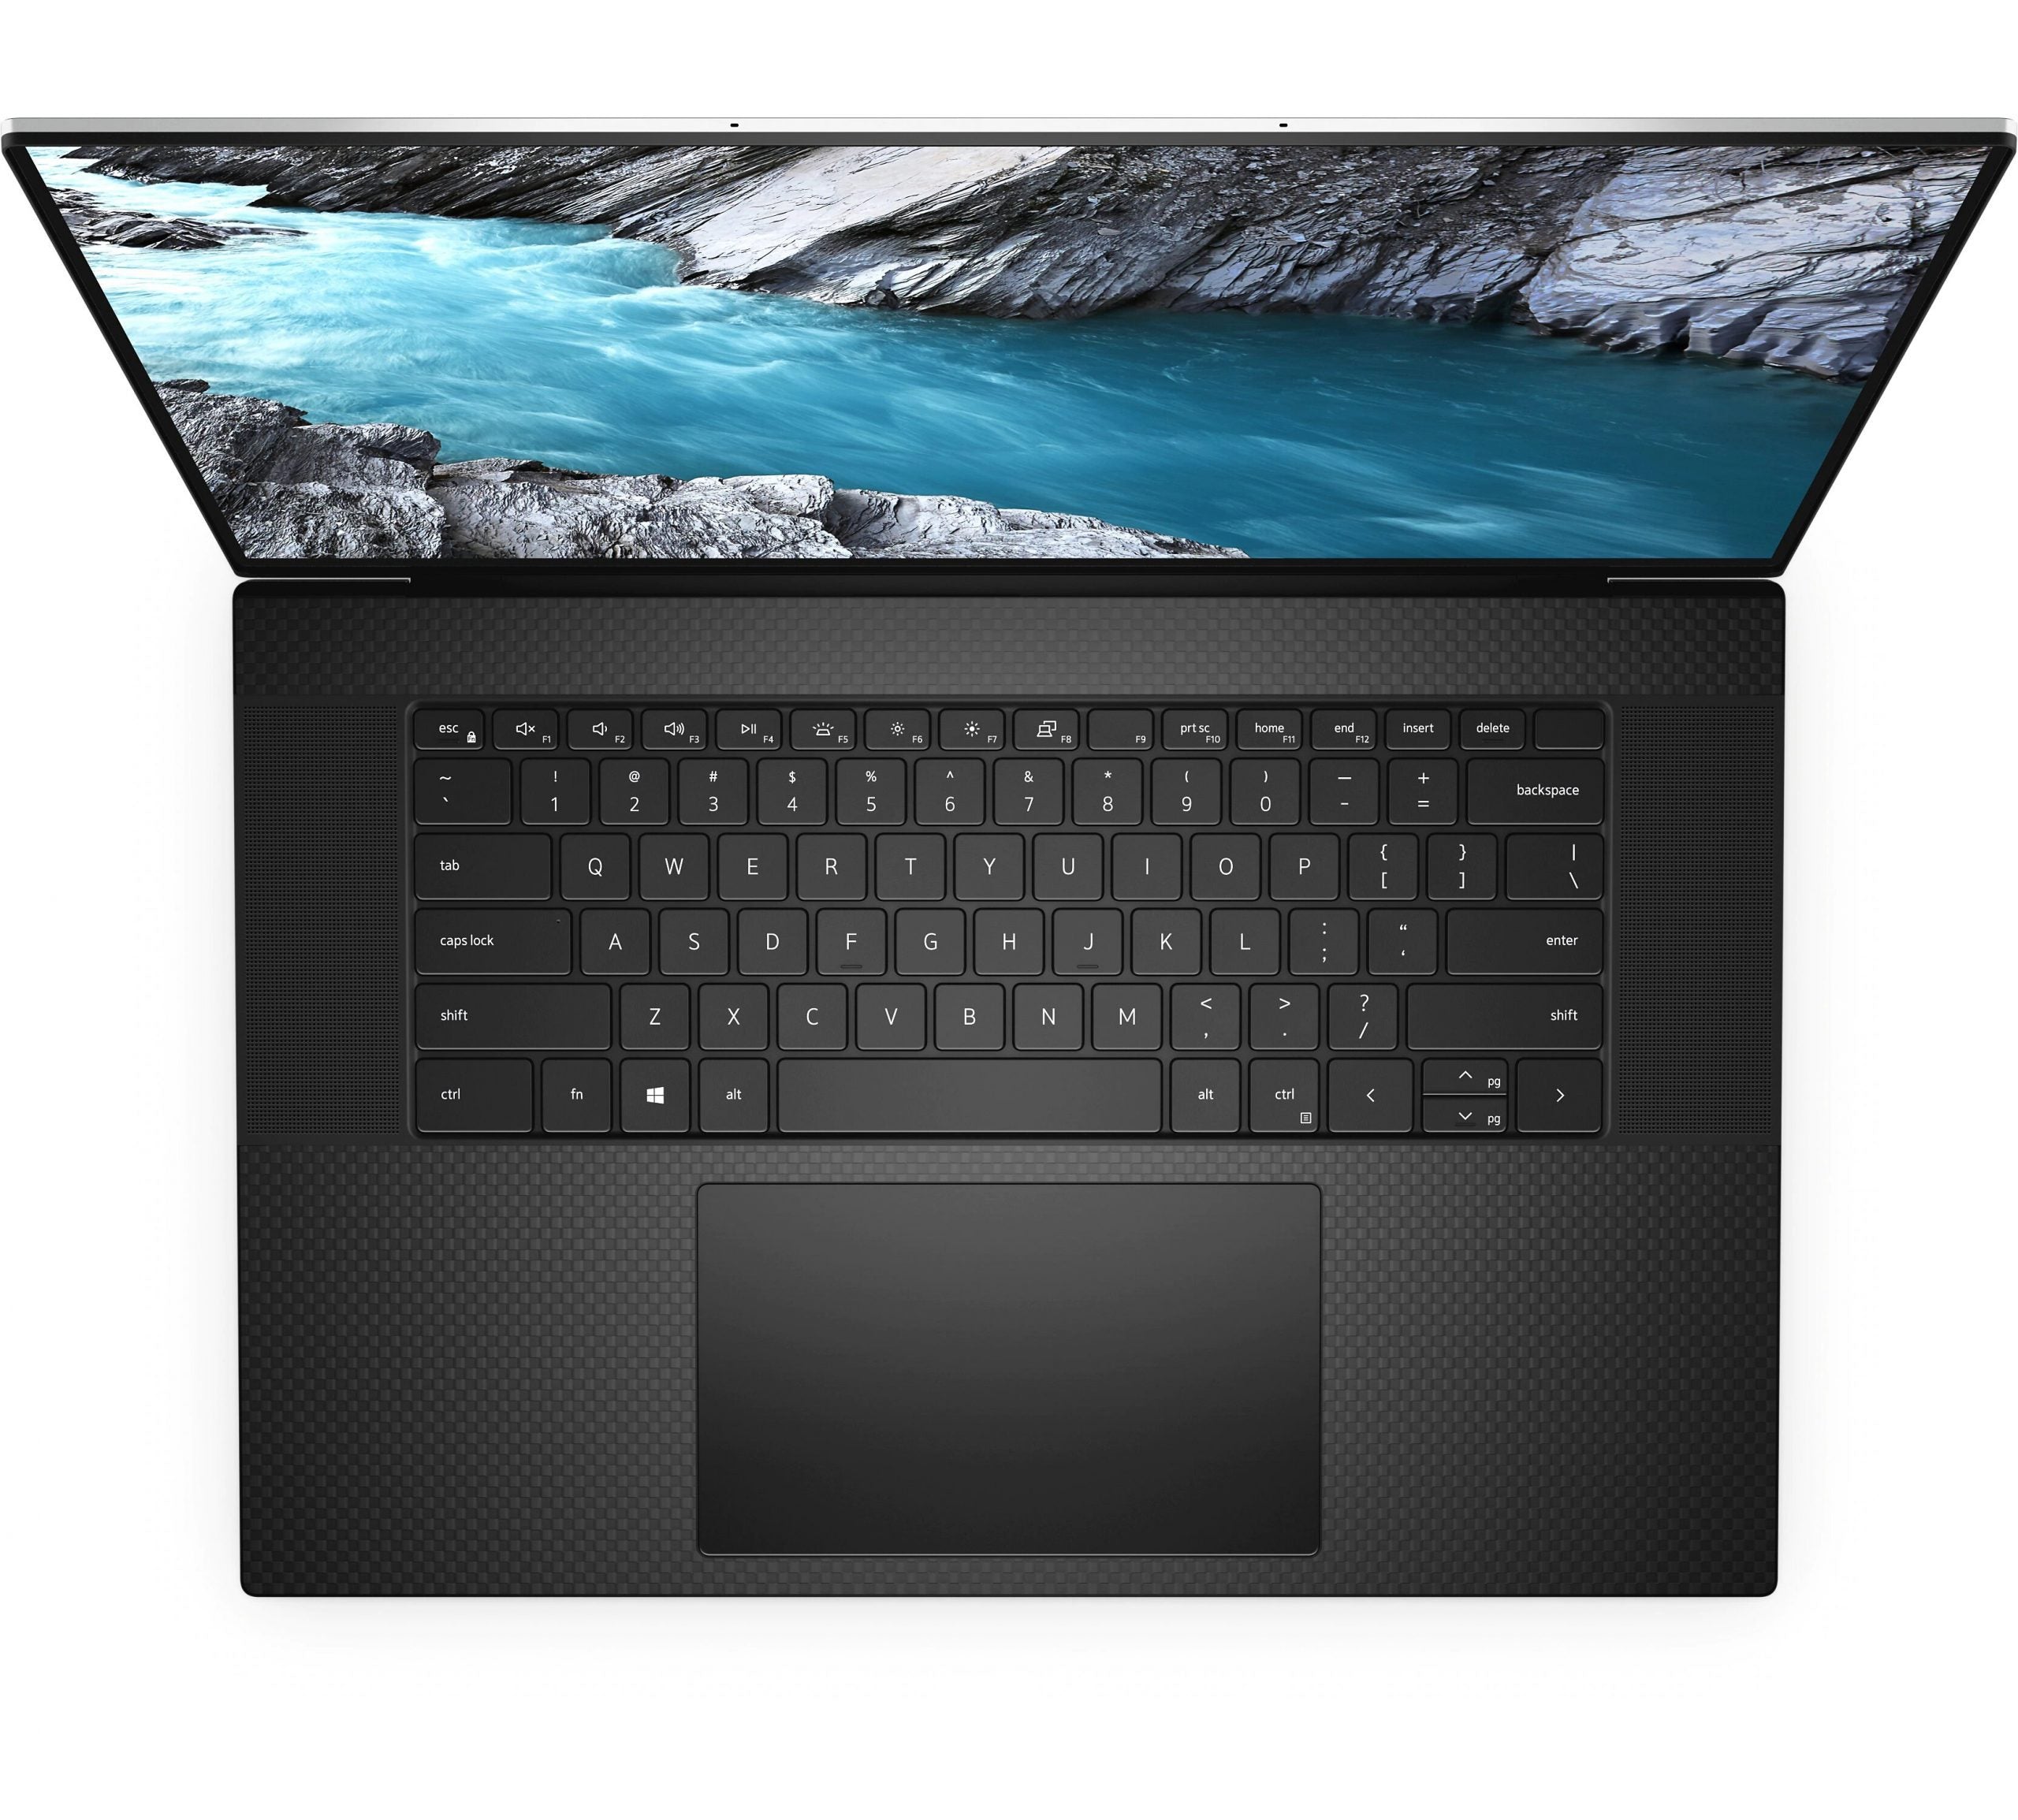 DELL XPS 17 9700 Workstation and gaming notebook 17″ Inch 4K | Intel Core i7-10750H 2.6Ghz | Ram 32Gb DDR4 | SSD 2Tb | Nvidia GTX 1650Ti 4Gb | Windows 10 Pro